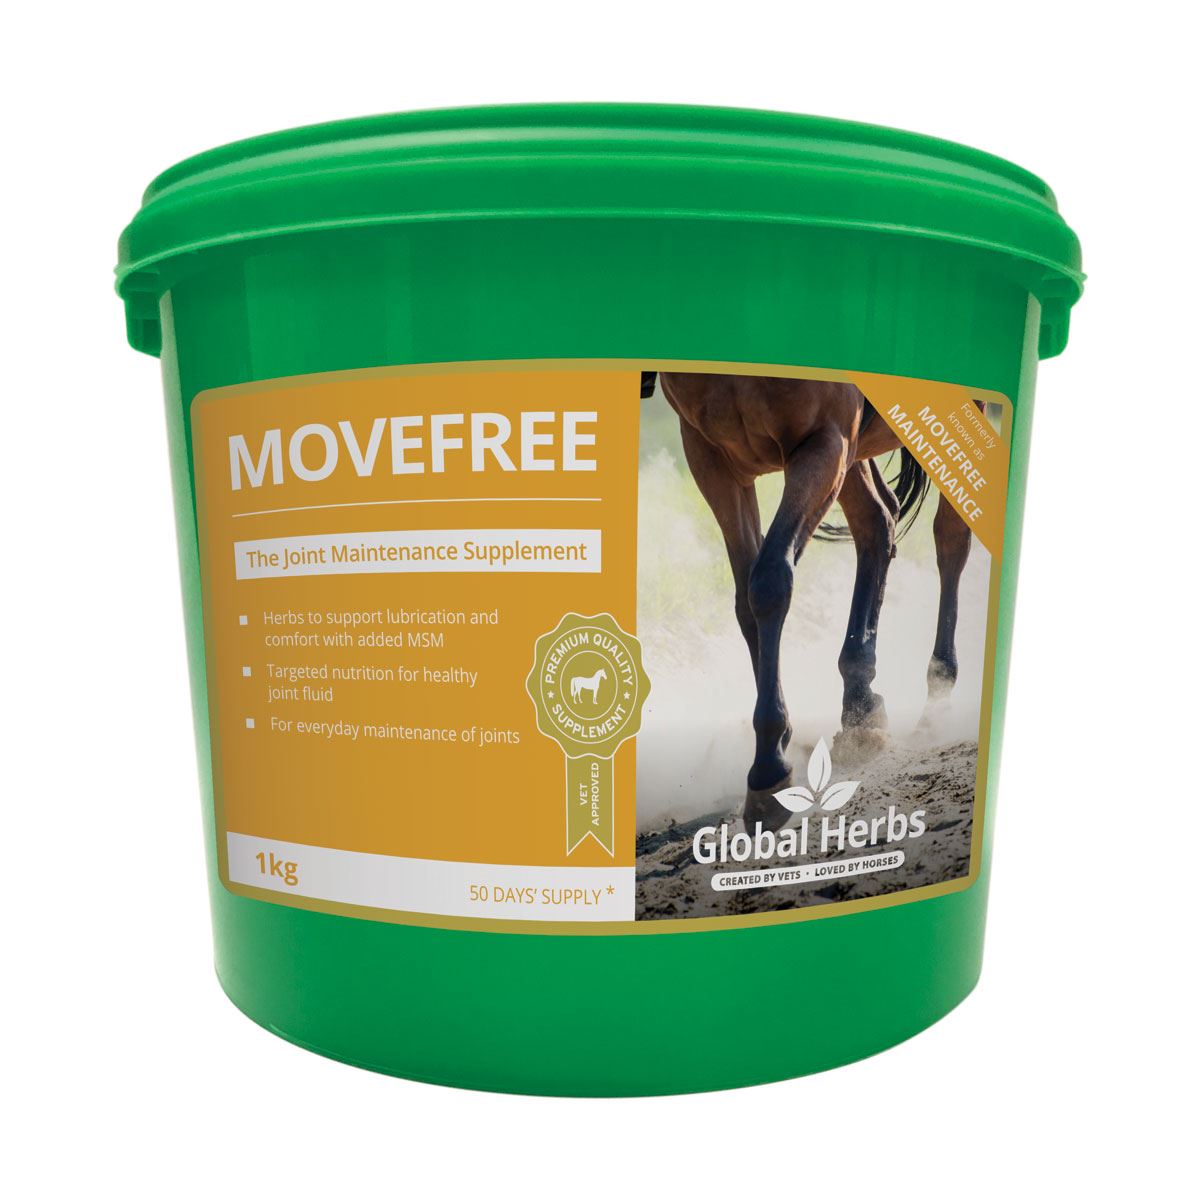 Global Herbs MoveFree - Just Horse Riders